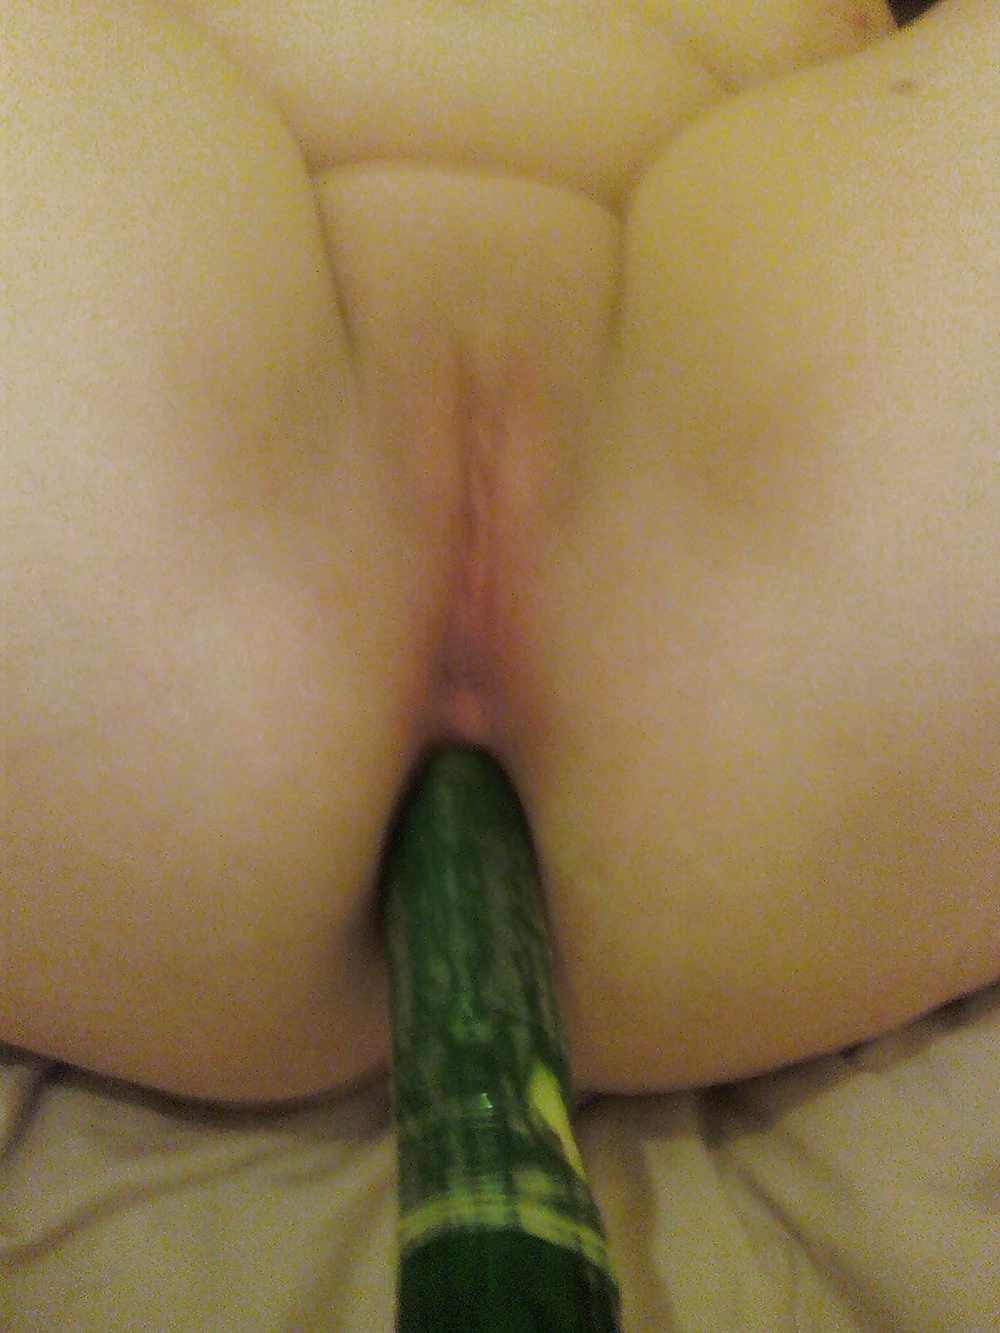 Bbw big tit wife Amy strips and plays with cucumber #28875927